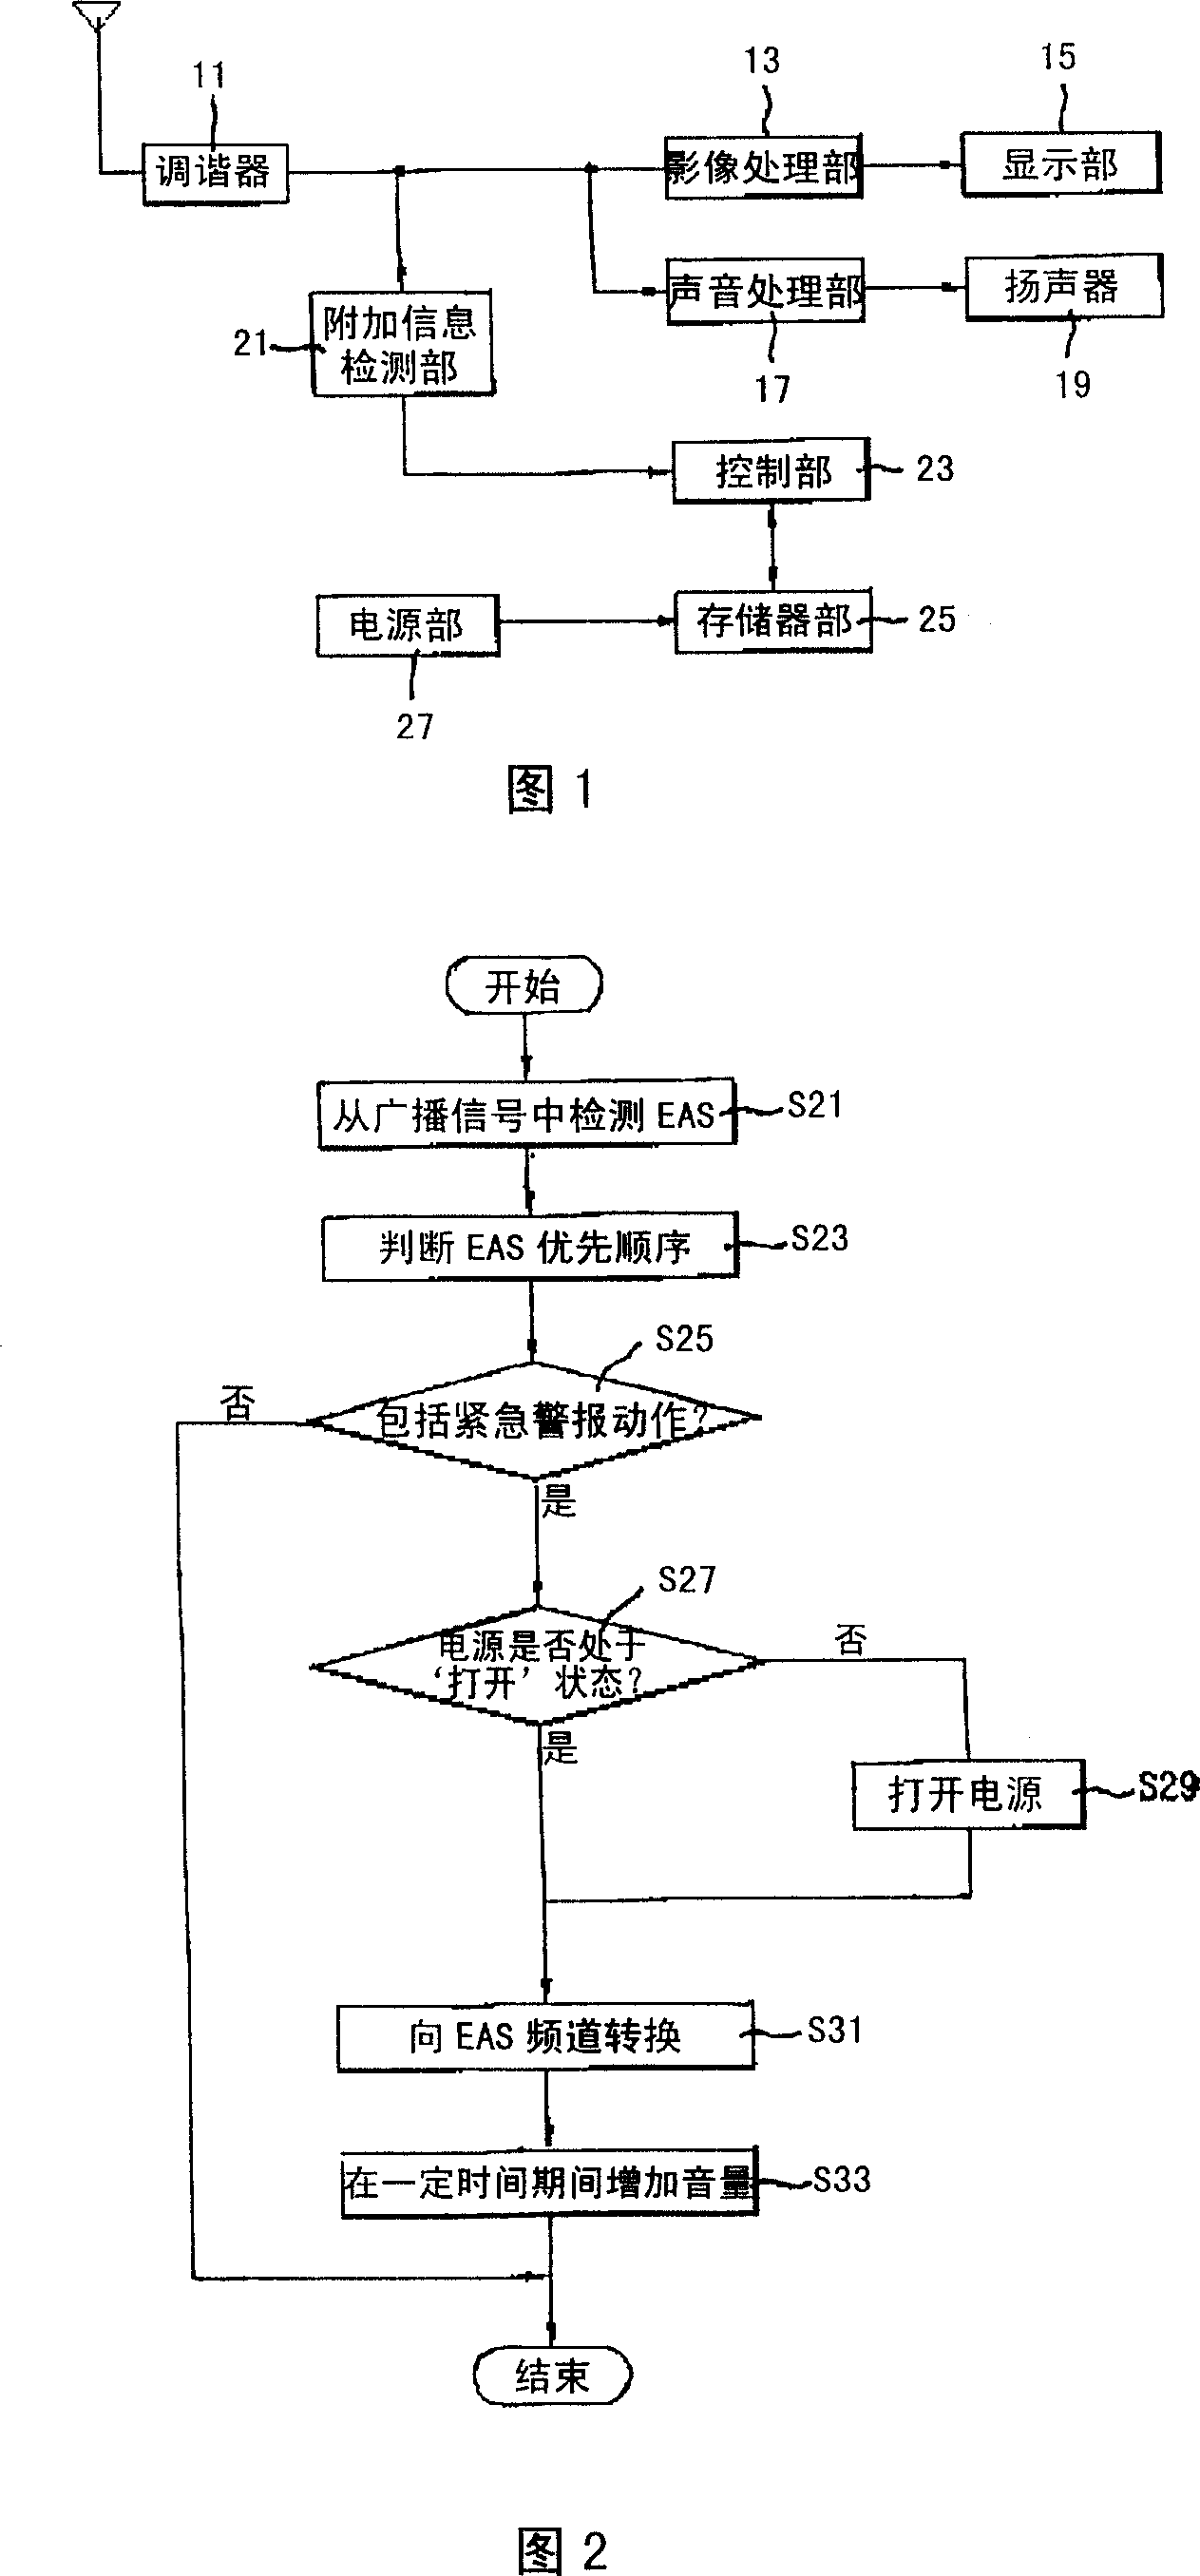 Information processing device and method of image equipment emergency alarm system